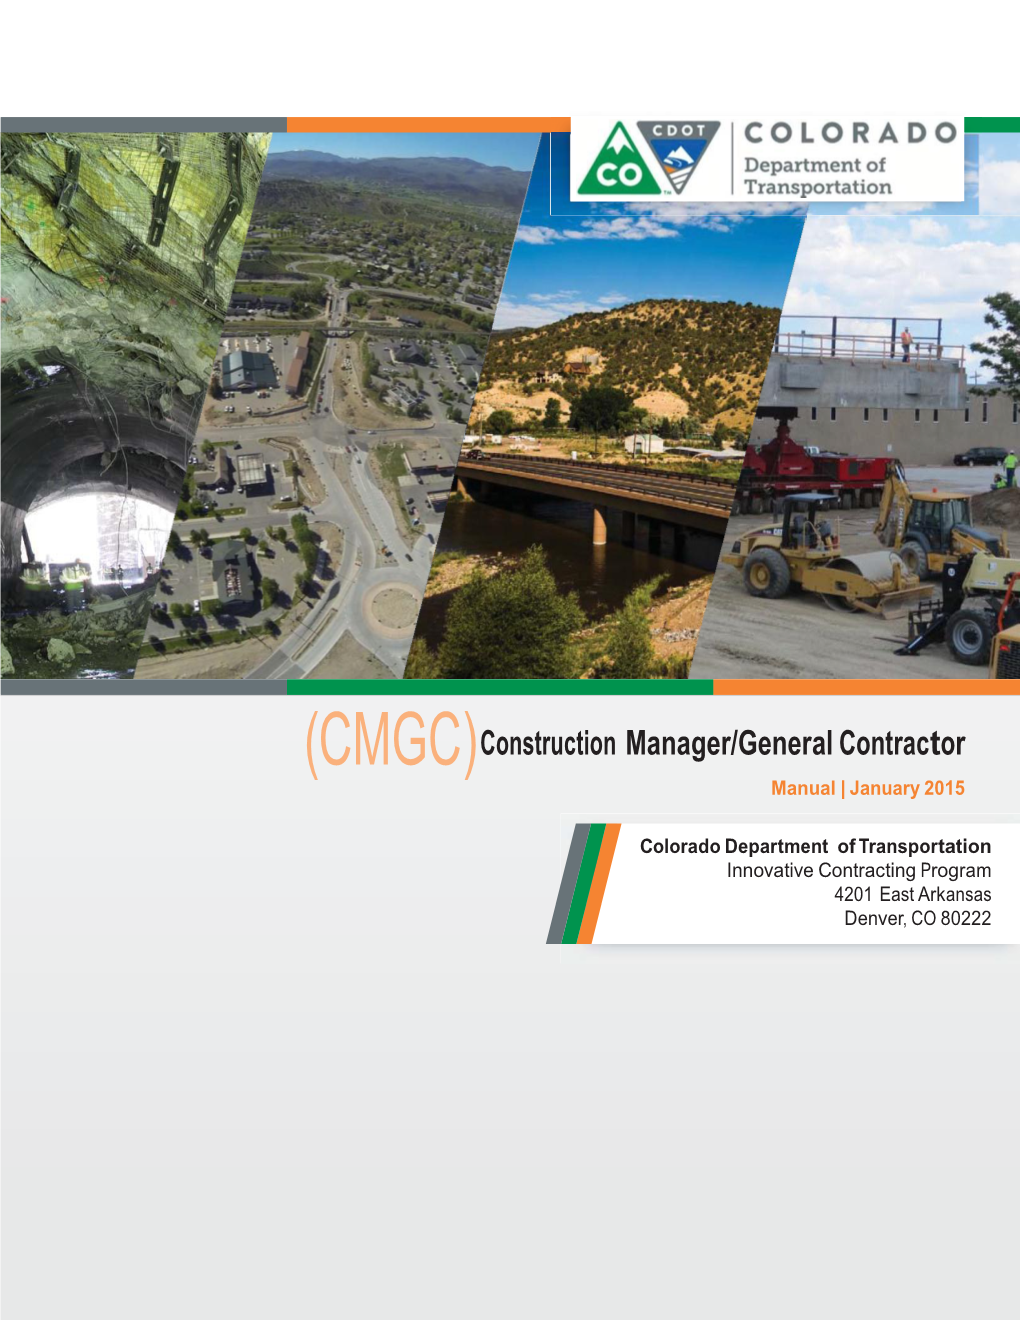 (CMGC)Construction Manager/General Contractor Manual | January 2015